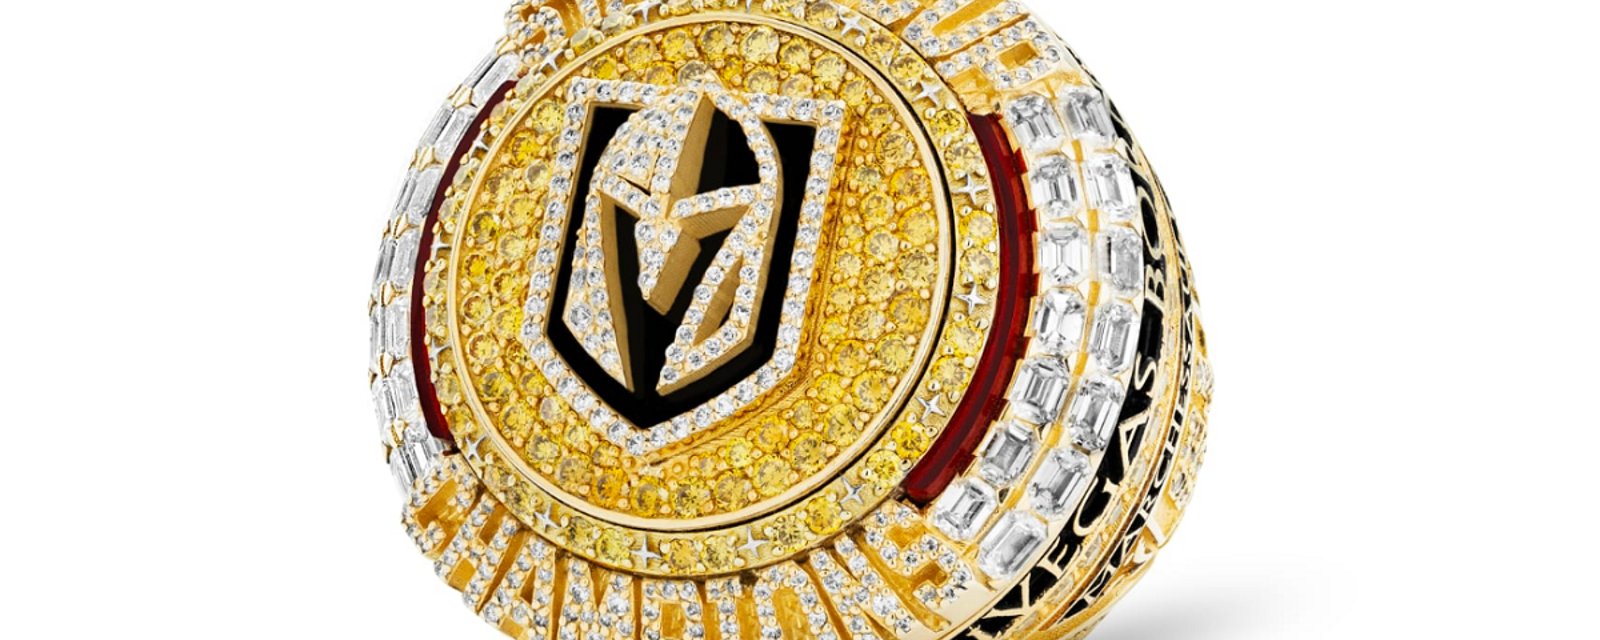 Golden Knights unveil game-changing championship rings.